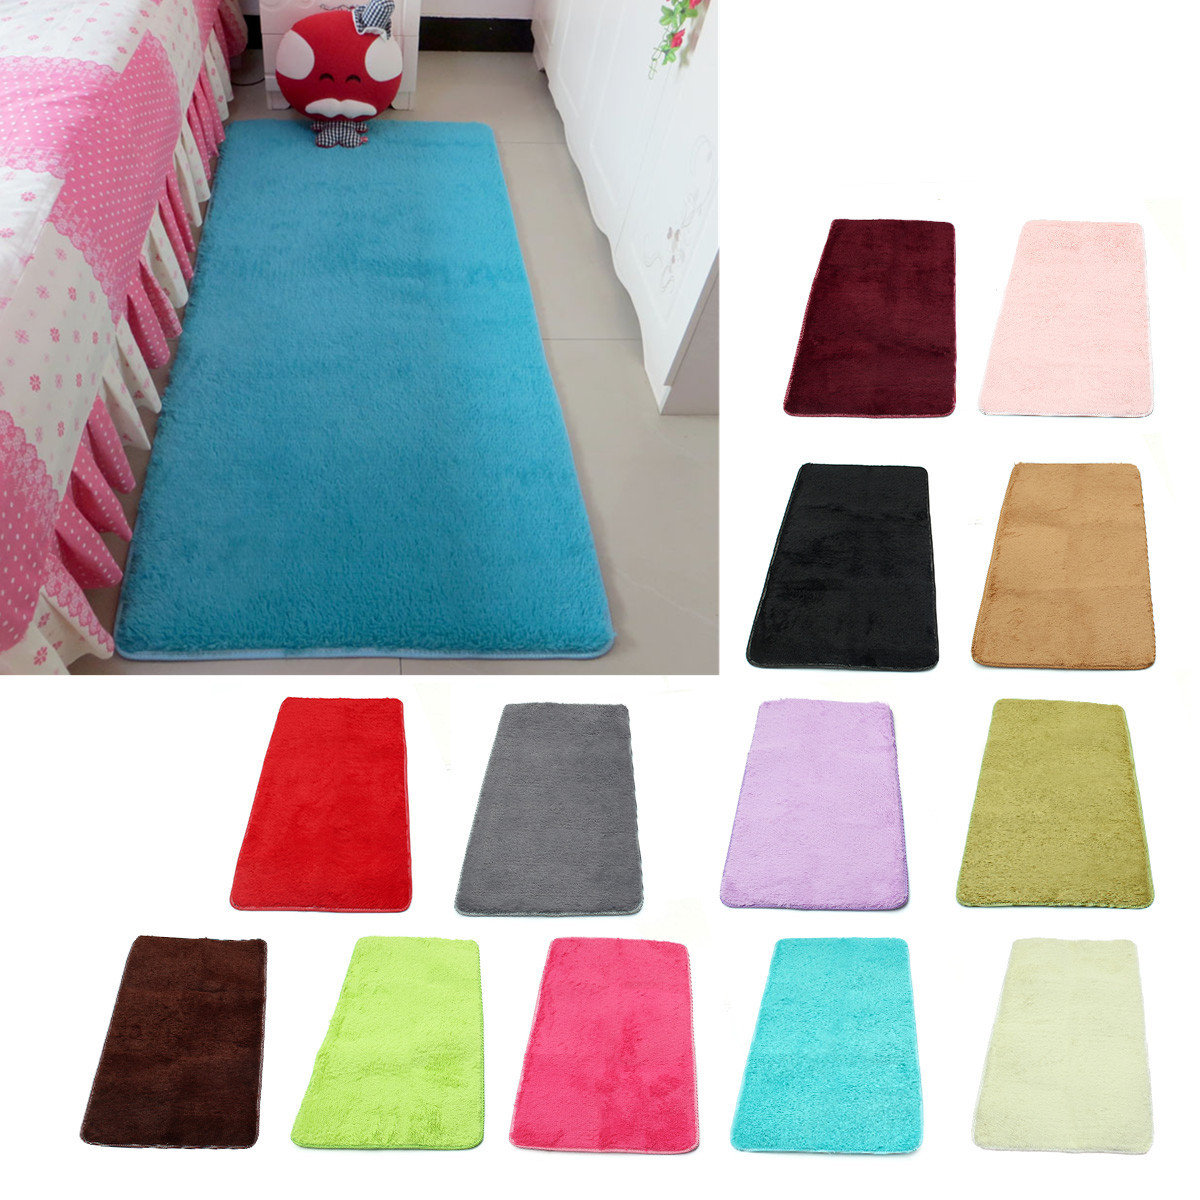 

60x120cm Shaggy Fluffy Rugs Anti-Skid Area Rug Dining Room Carpet Home Bedroom Floor Mat, Green fruit blue pink gray coffee red / rose rice white khaki purple green red wine red black